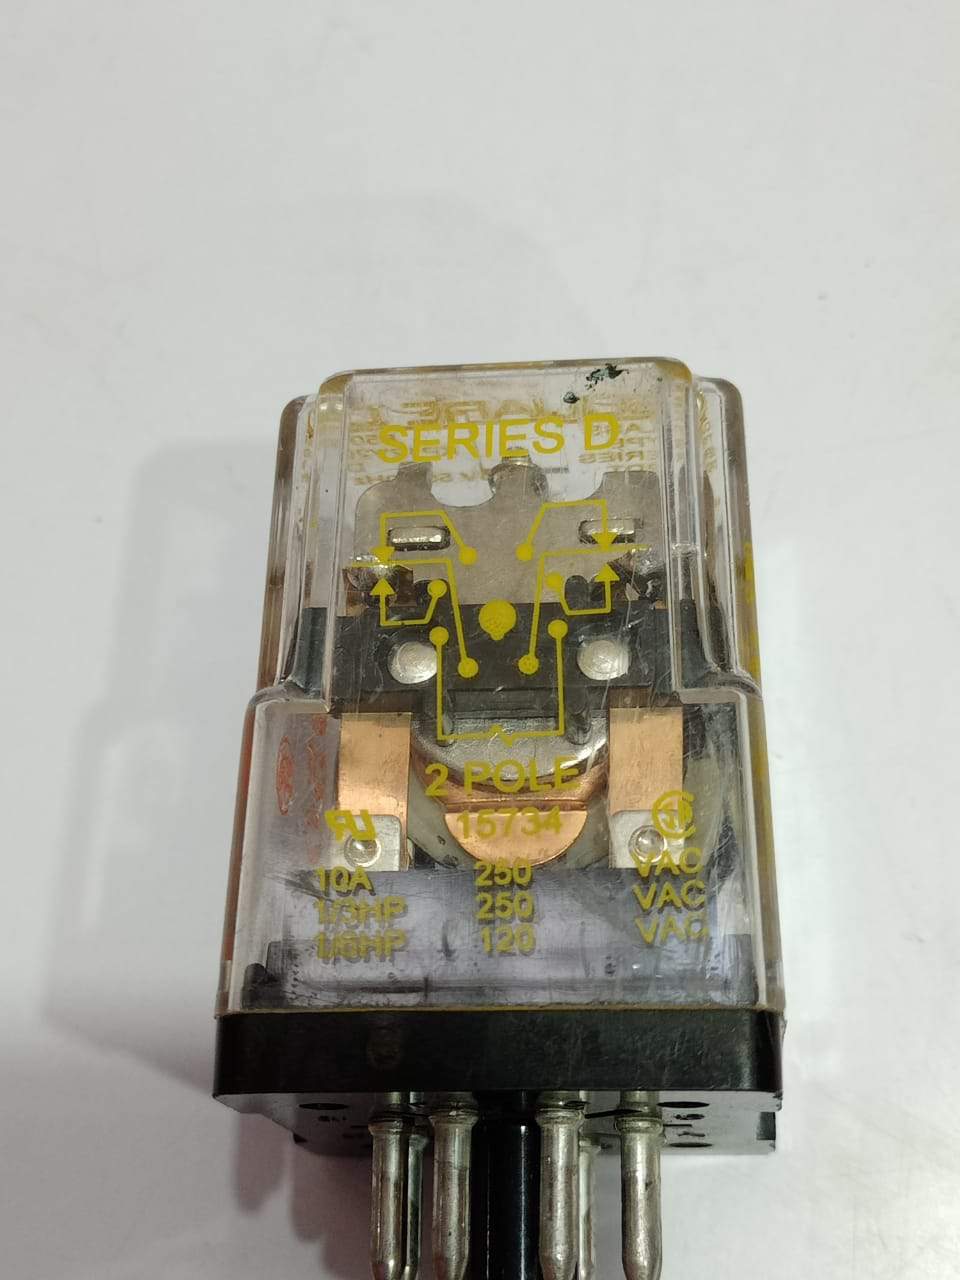 Square D 8501 KP12V20 Series D Relay